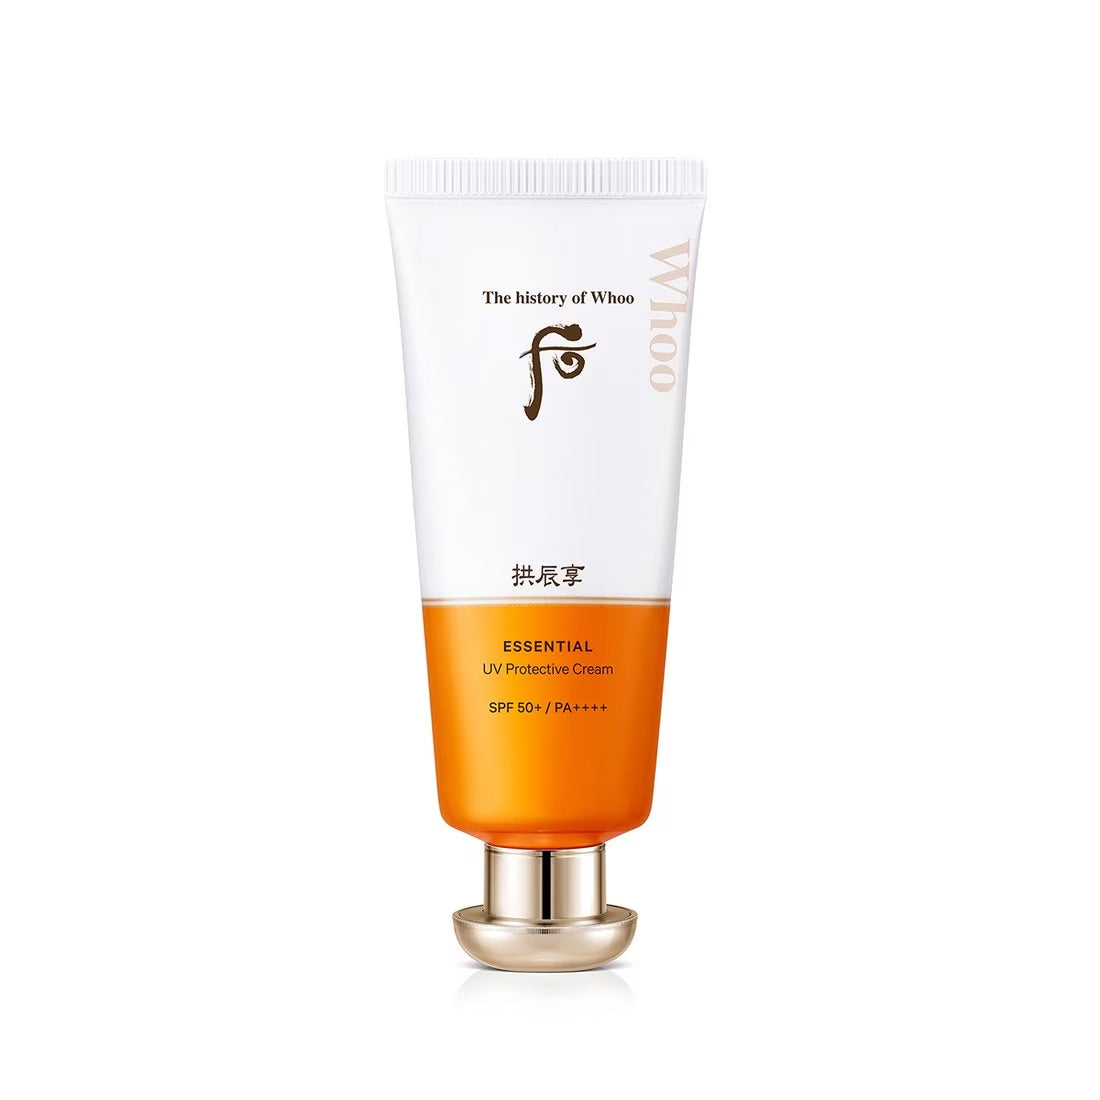 THE HISTORY OF WHOO Gongjinhyang Essential UV Protective Cream SPF50+/PA+++